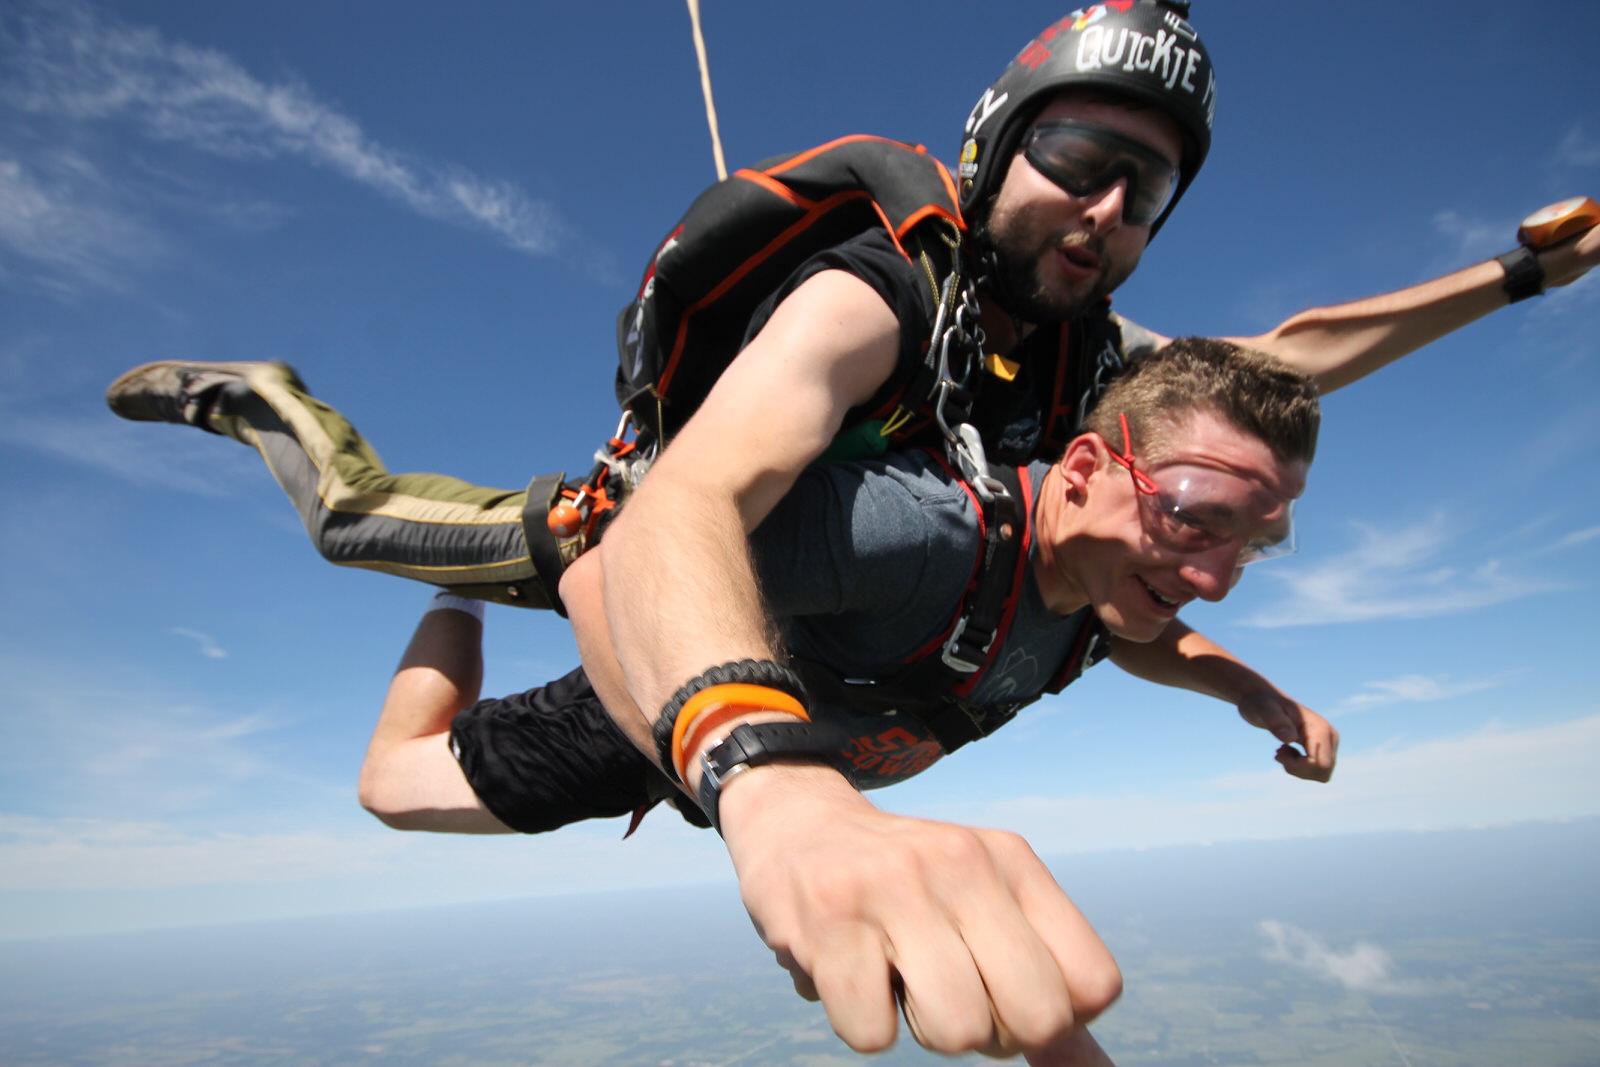 Skydiving Age Limit How Old Do You Have to Be to Skydive?